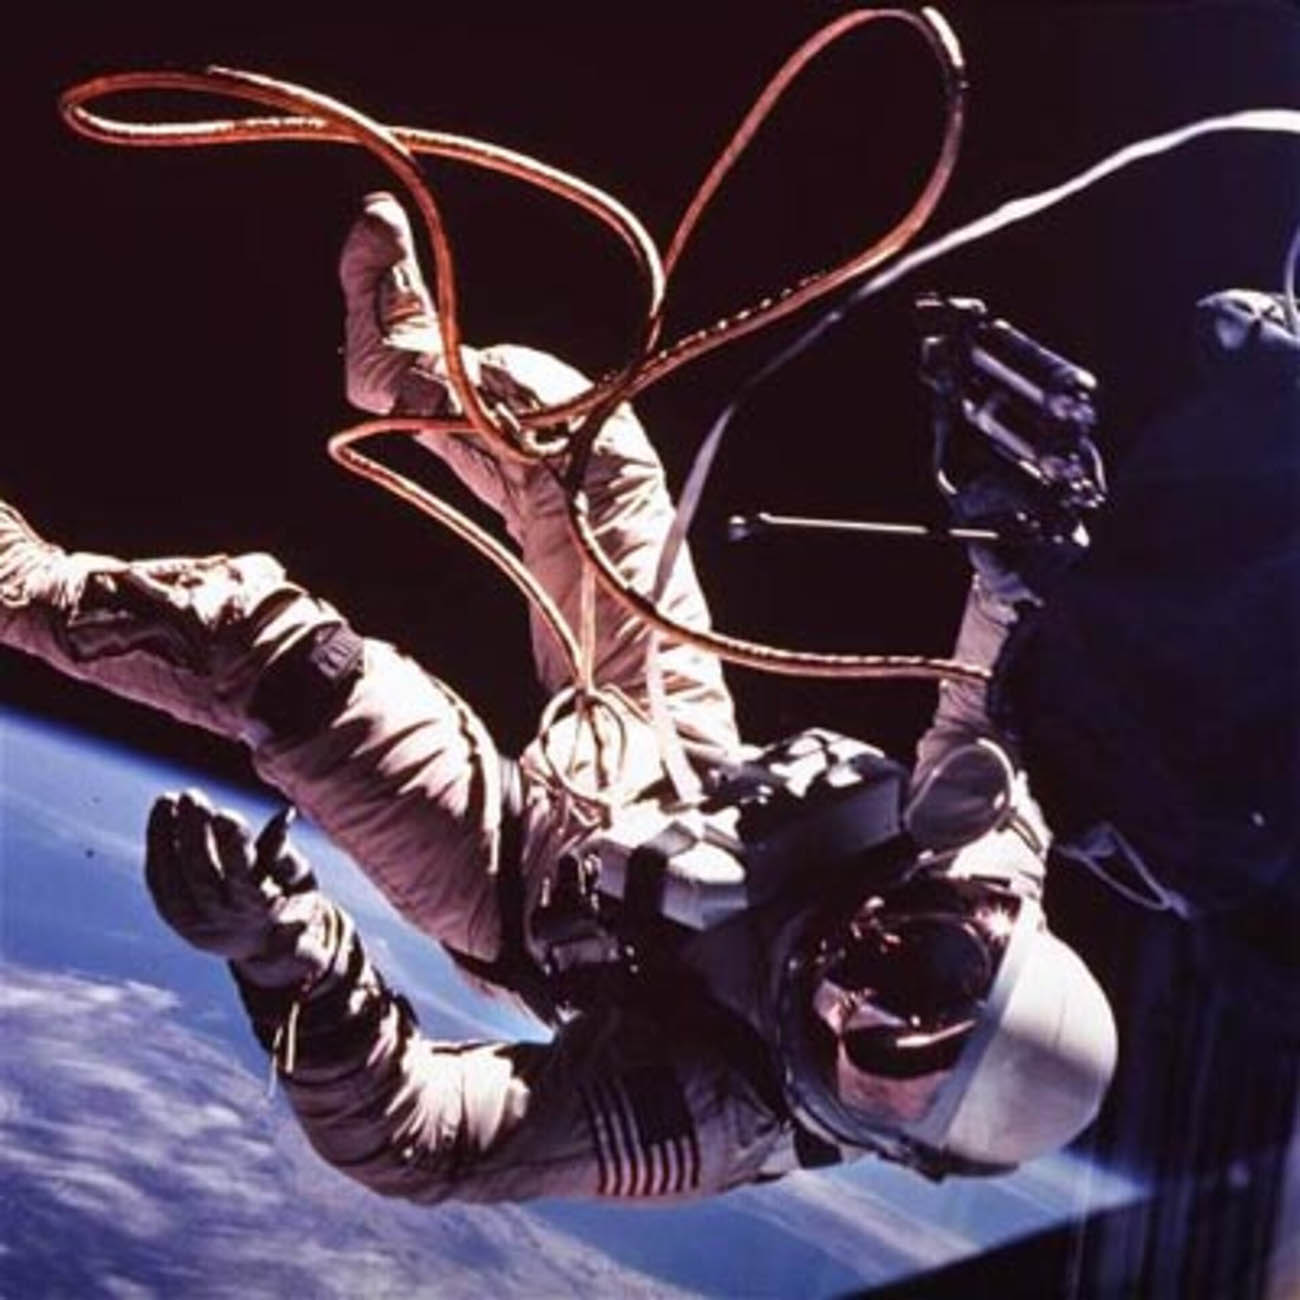 Astronaut Ed White moves away from the Gemini-4 capsule